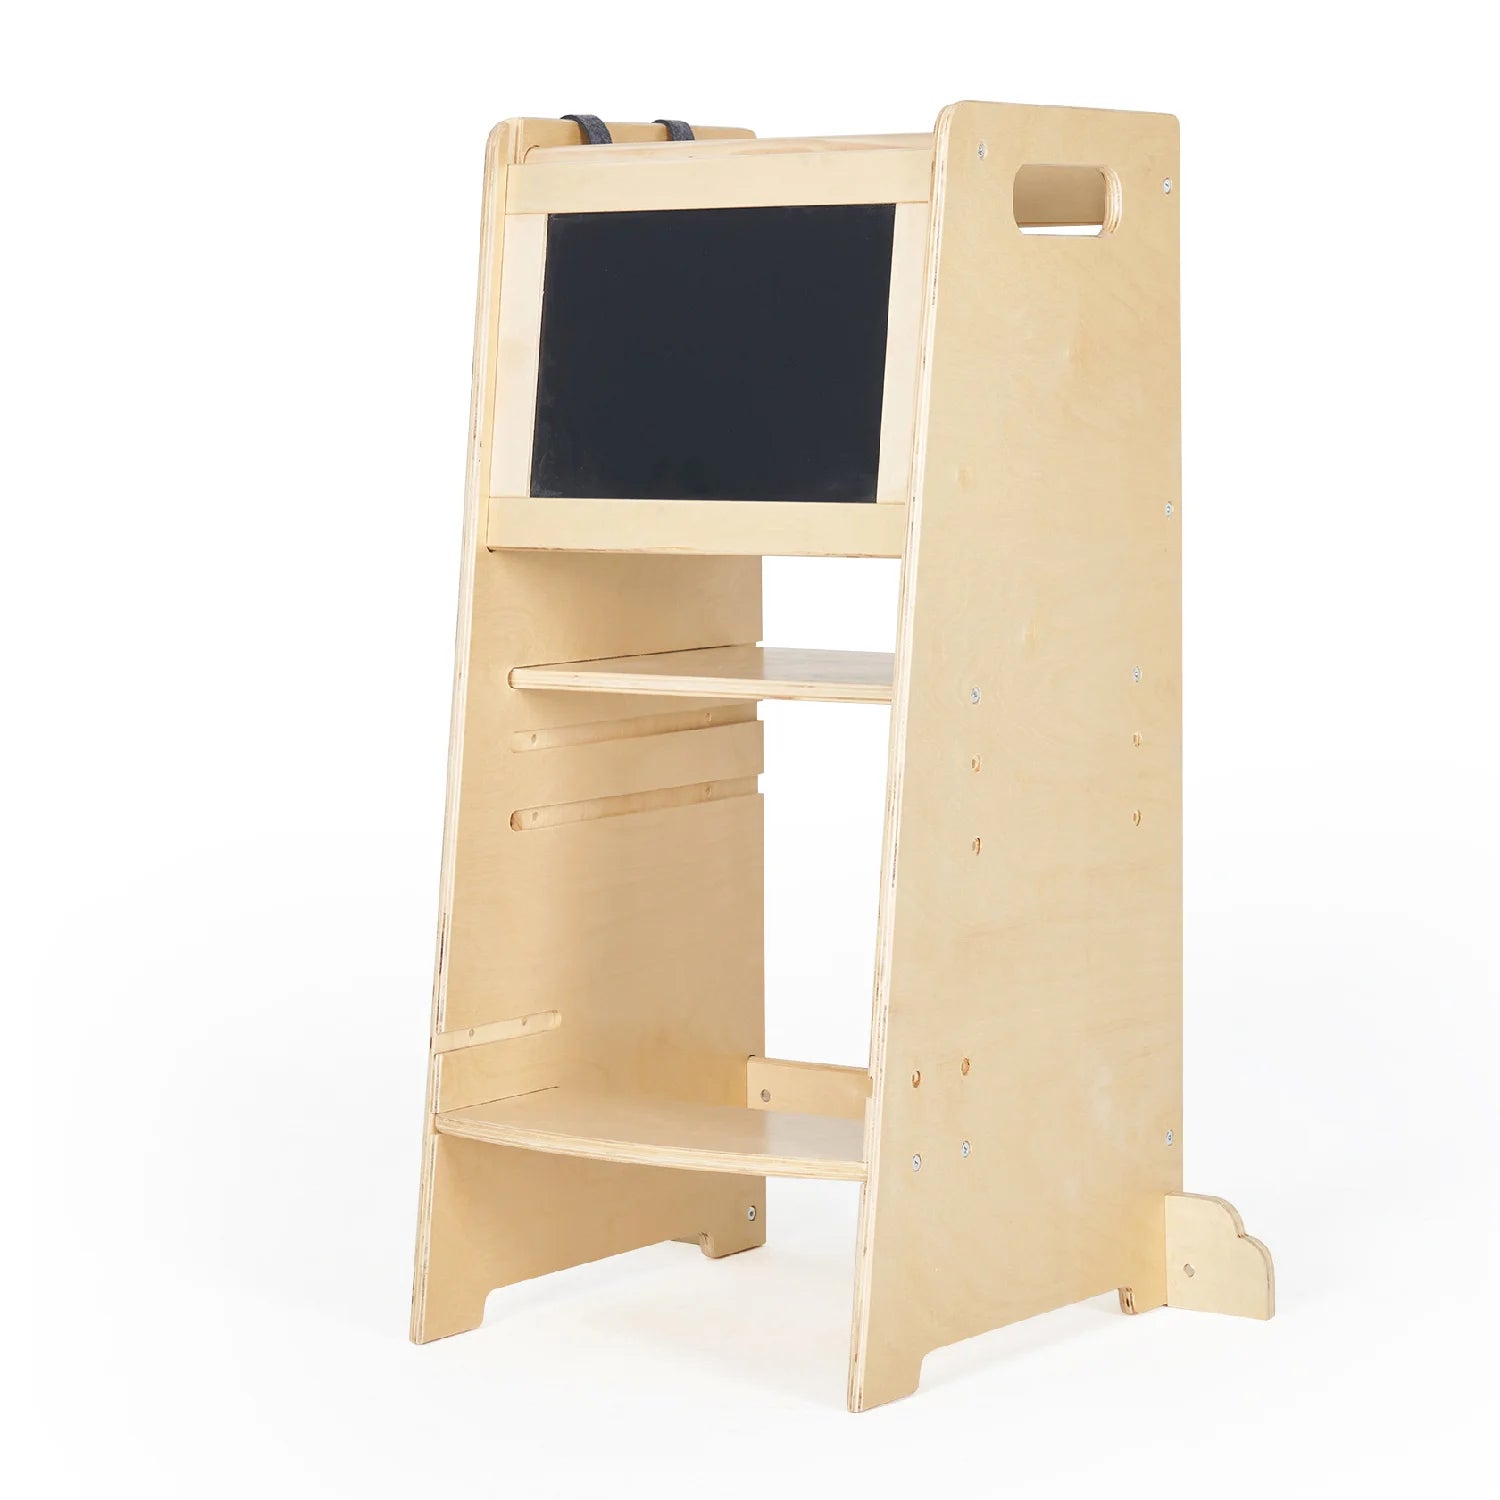 Wooden toddler learning tower with blackboard and shelves